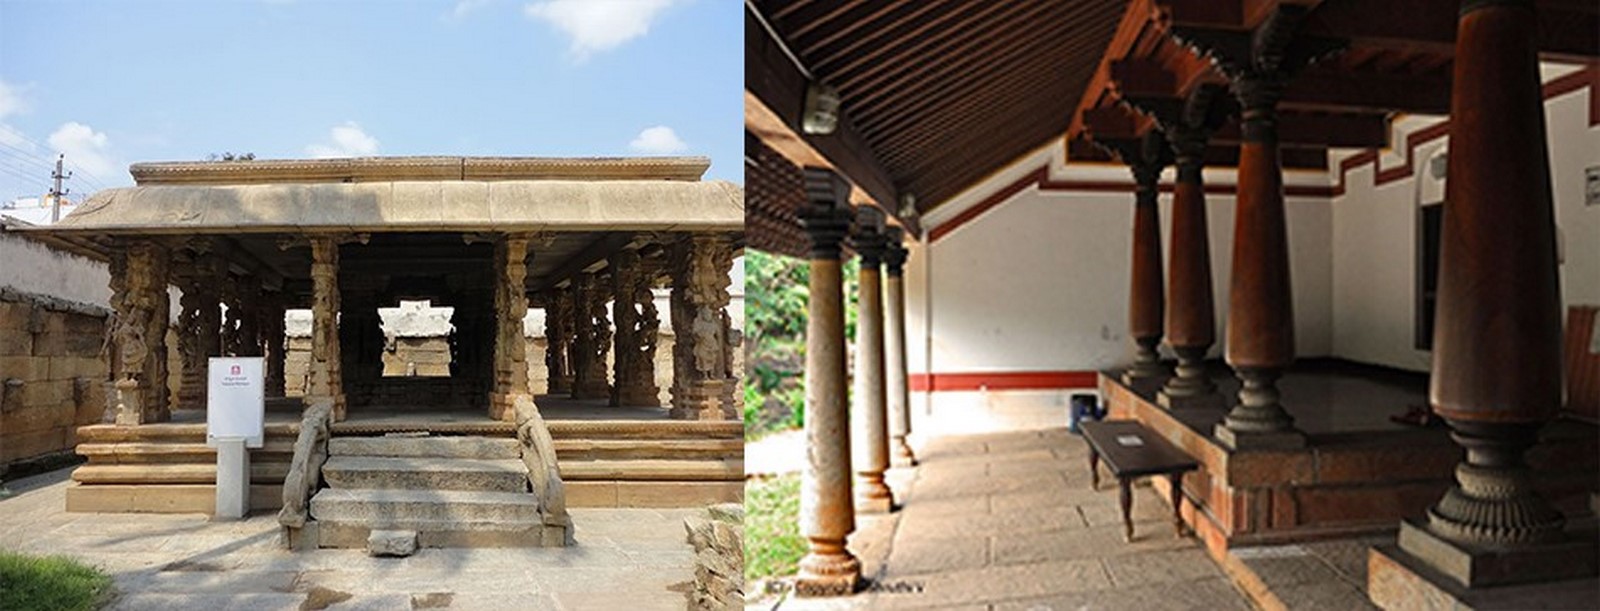 Transitional Spaces in Indian Architecture and Urban Planning: A Vital Element of Connectivity and Culture - Sheet1